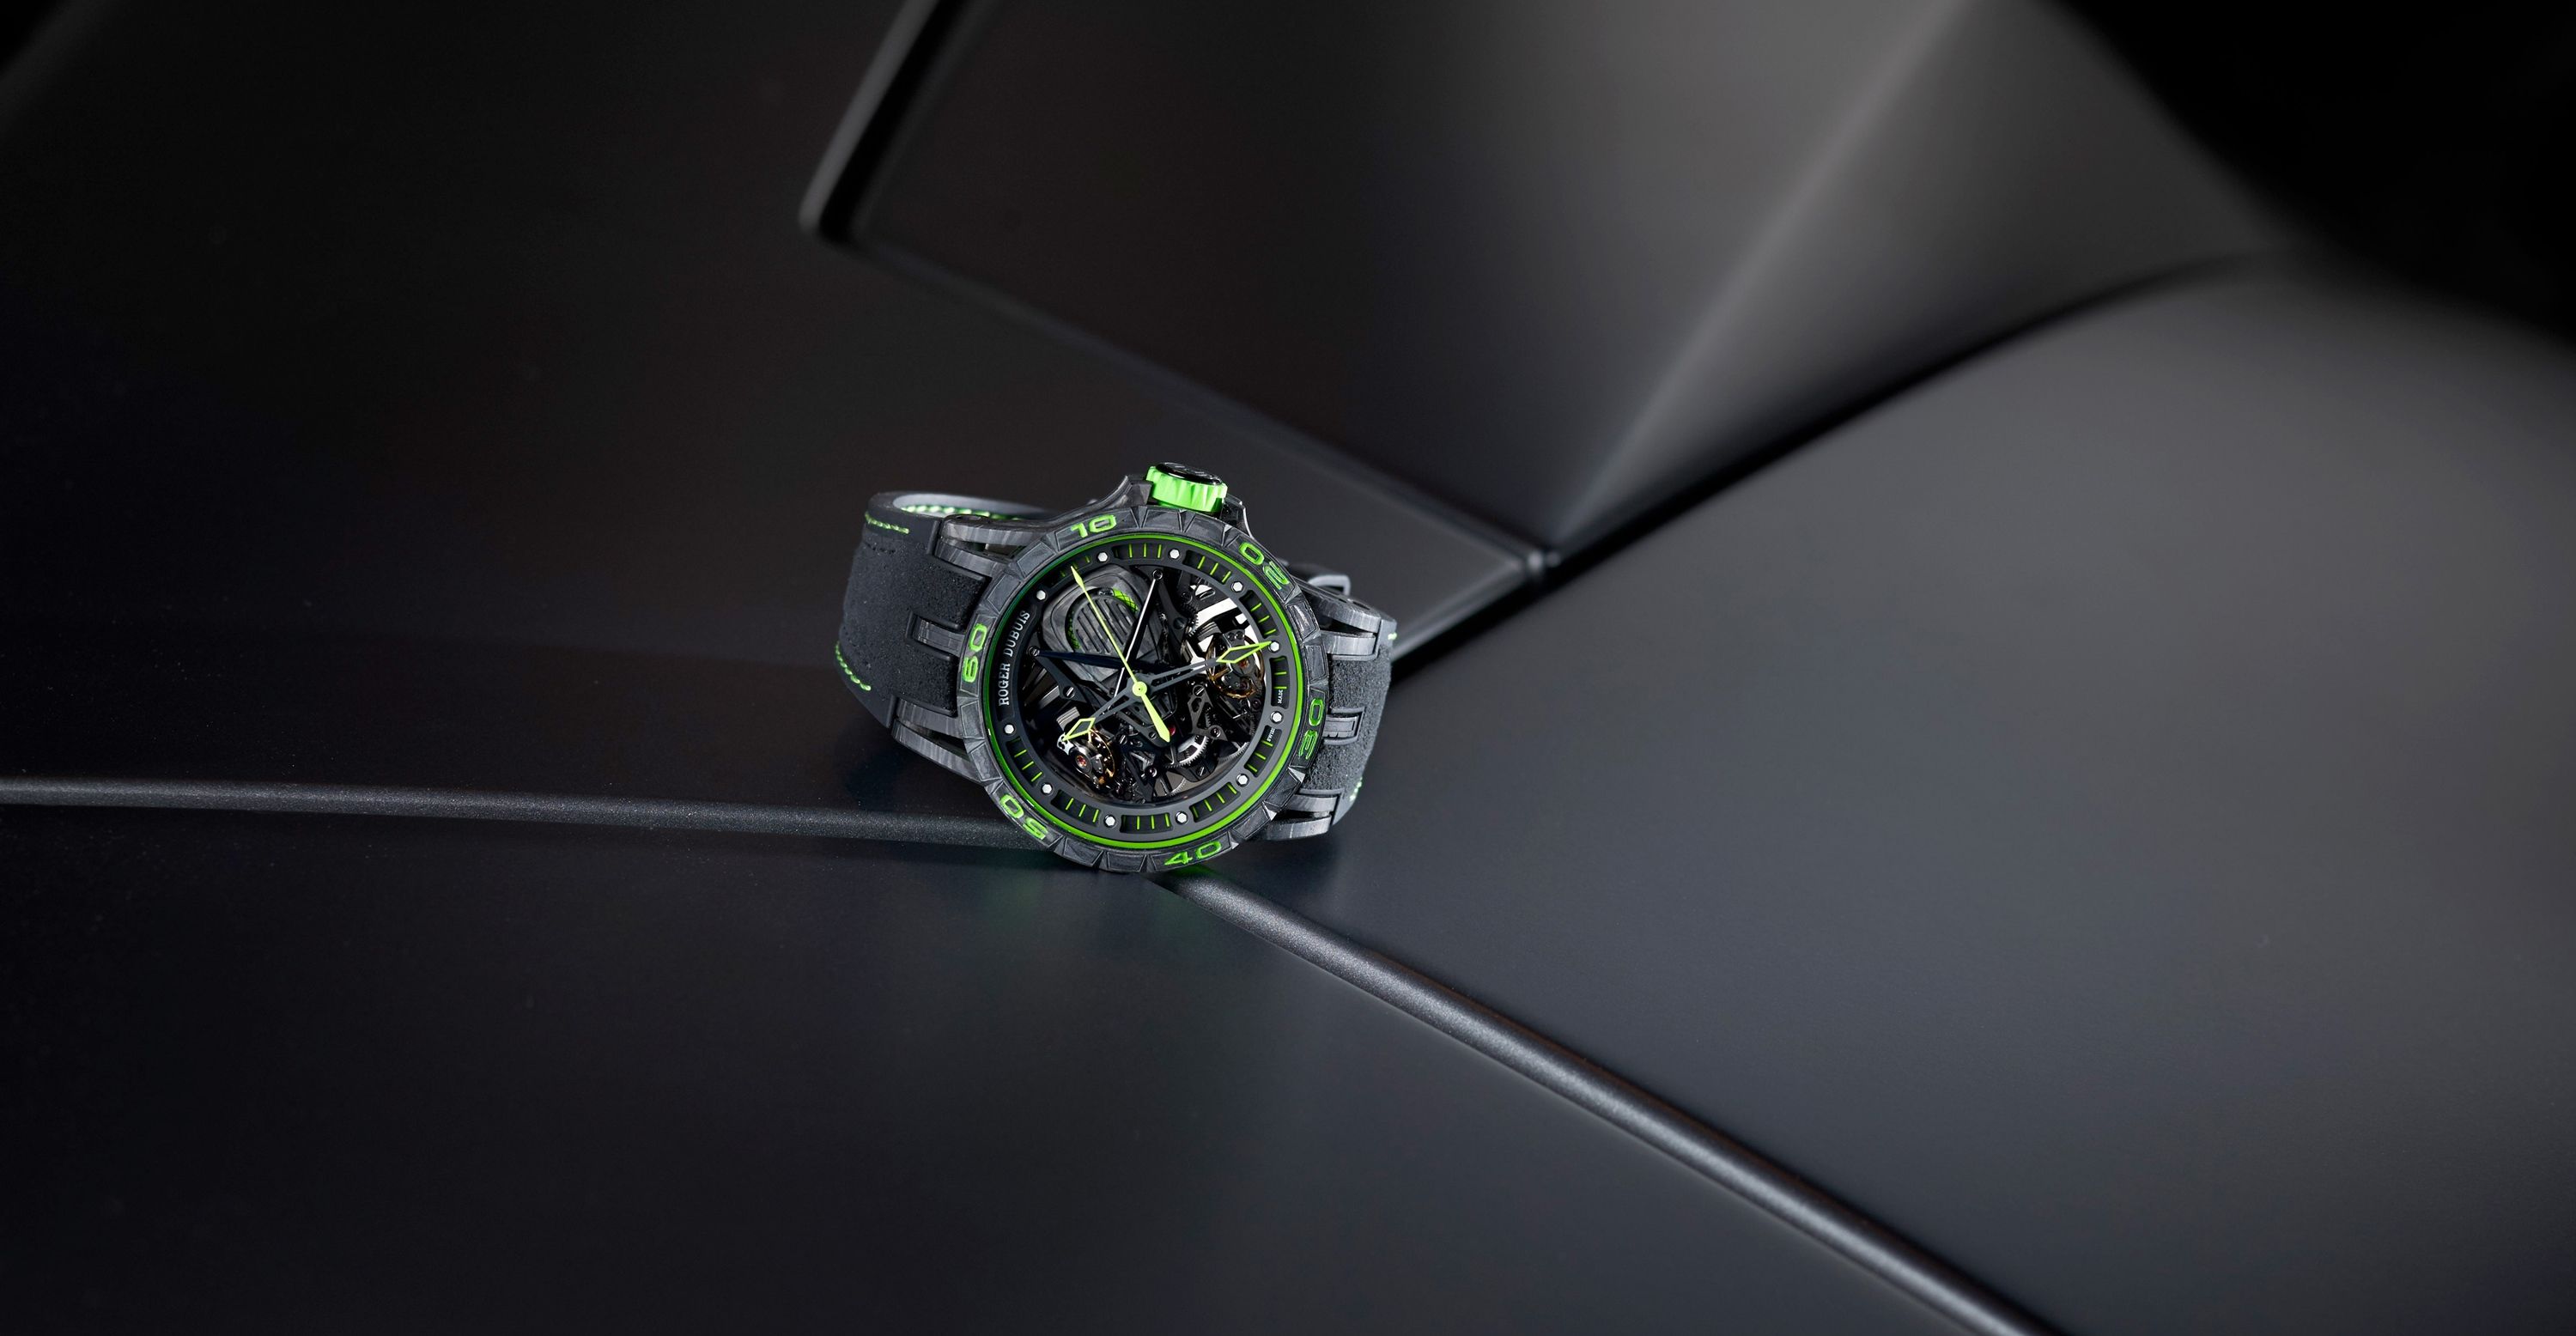 The Latest Collaboration Between Roger Dubuis and Lamborghini